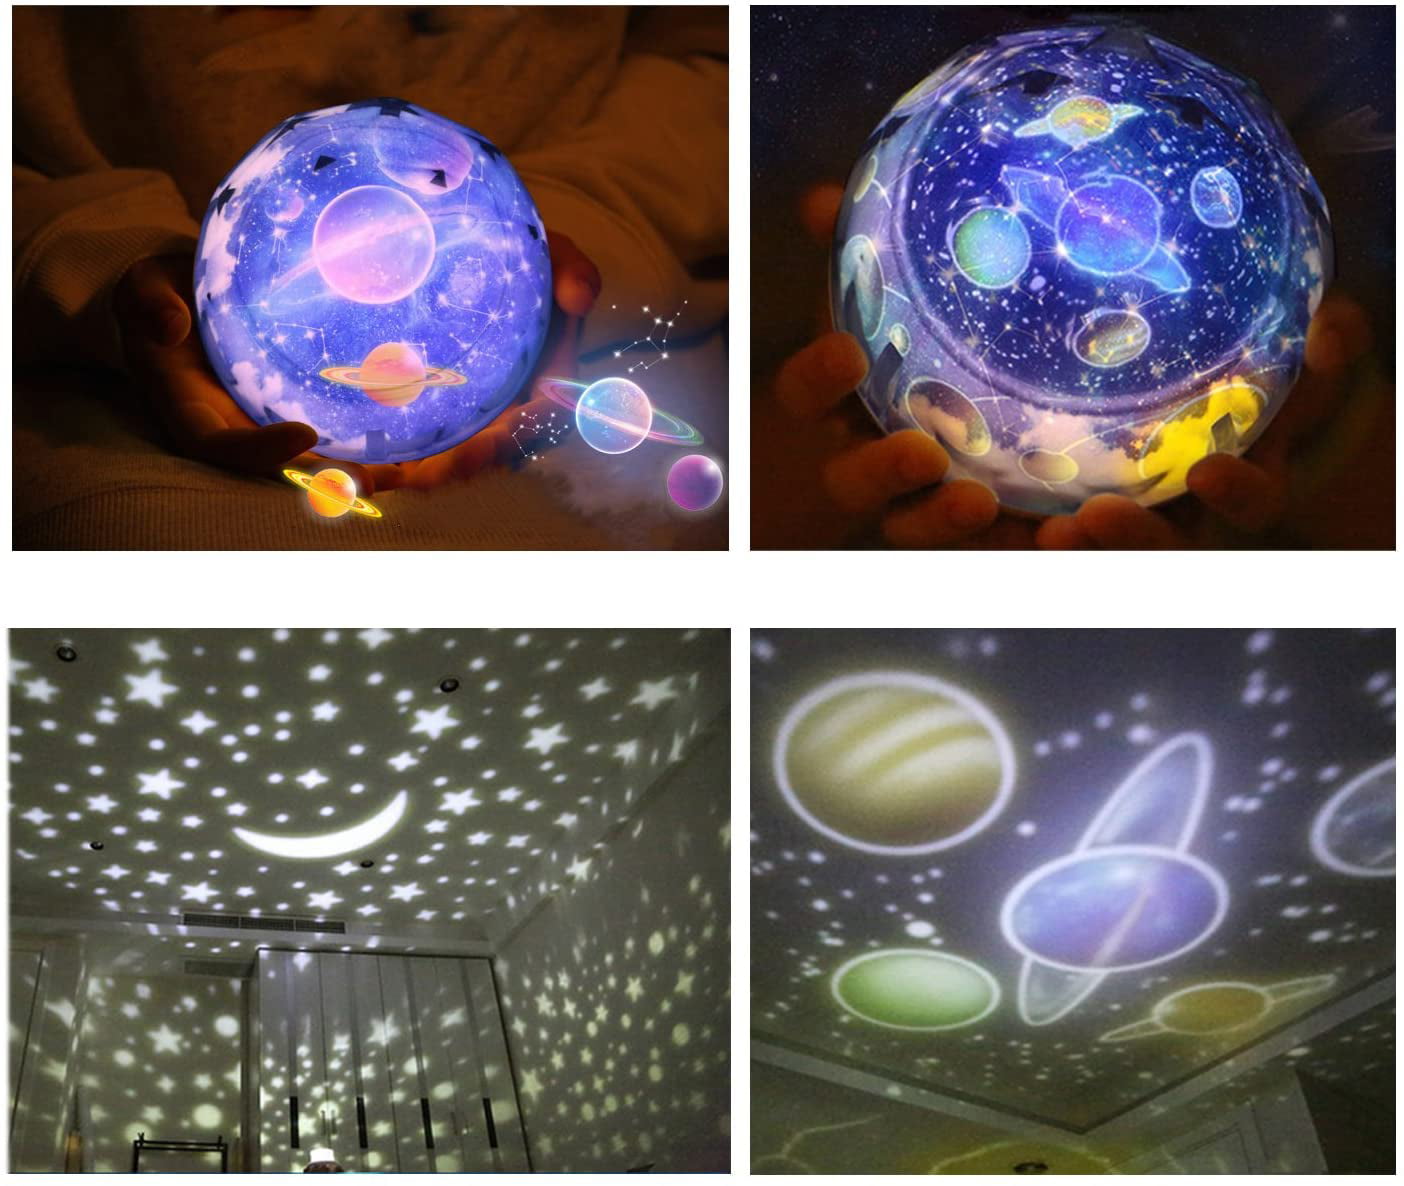 3 PACK & 9 PACK OF FILM] Star Night Light for Kids, Universe Night Light  Projection Lamp, Romantic Star Sea Birthday New Projector lamp for Bedroom  